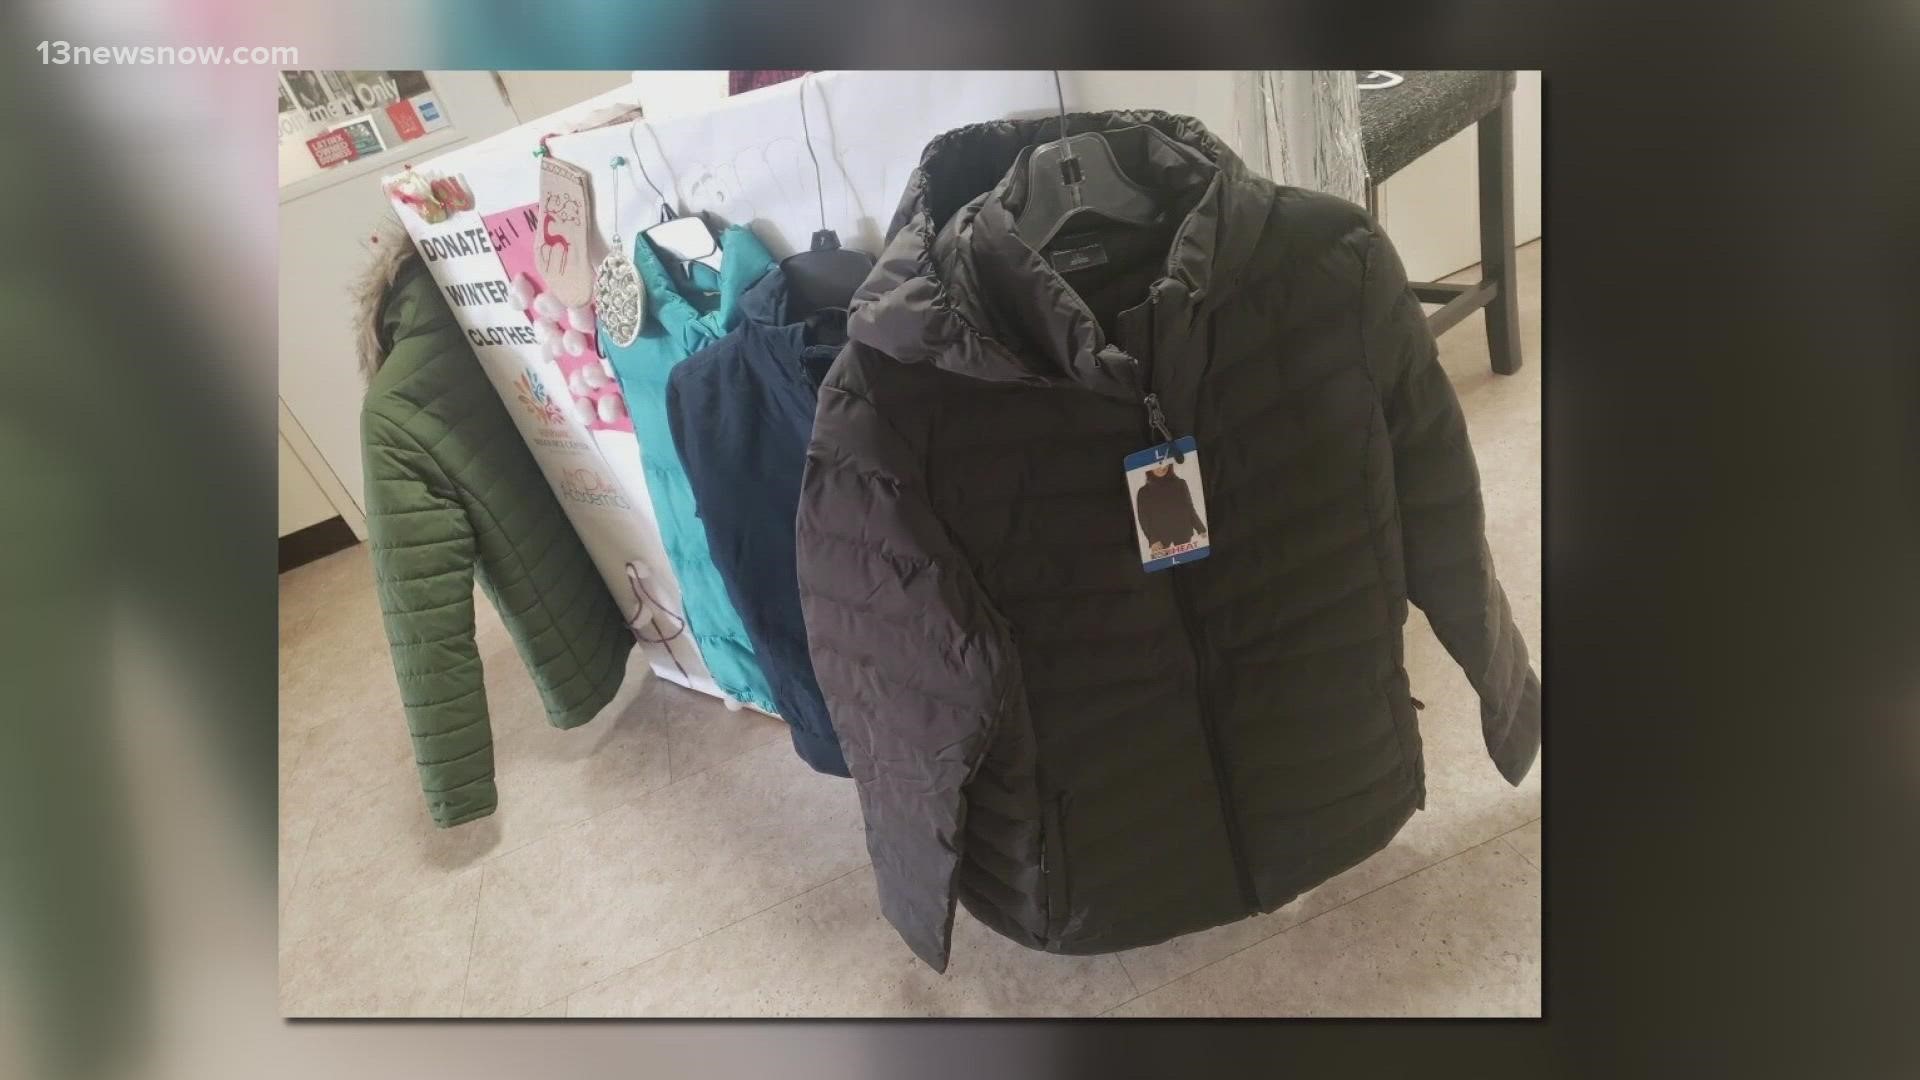 The center has been collecting coats for families, and now it's time to give them away.